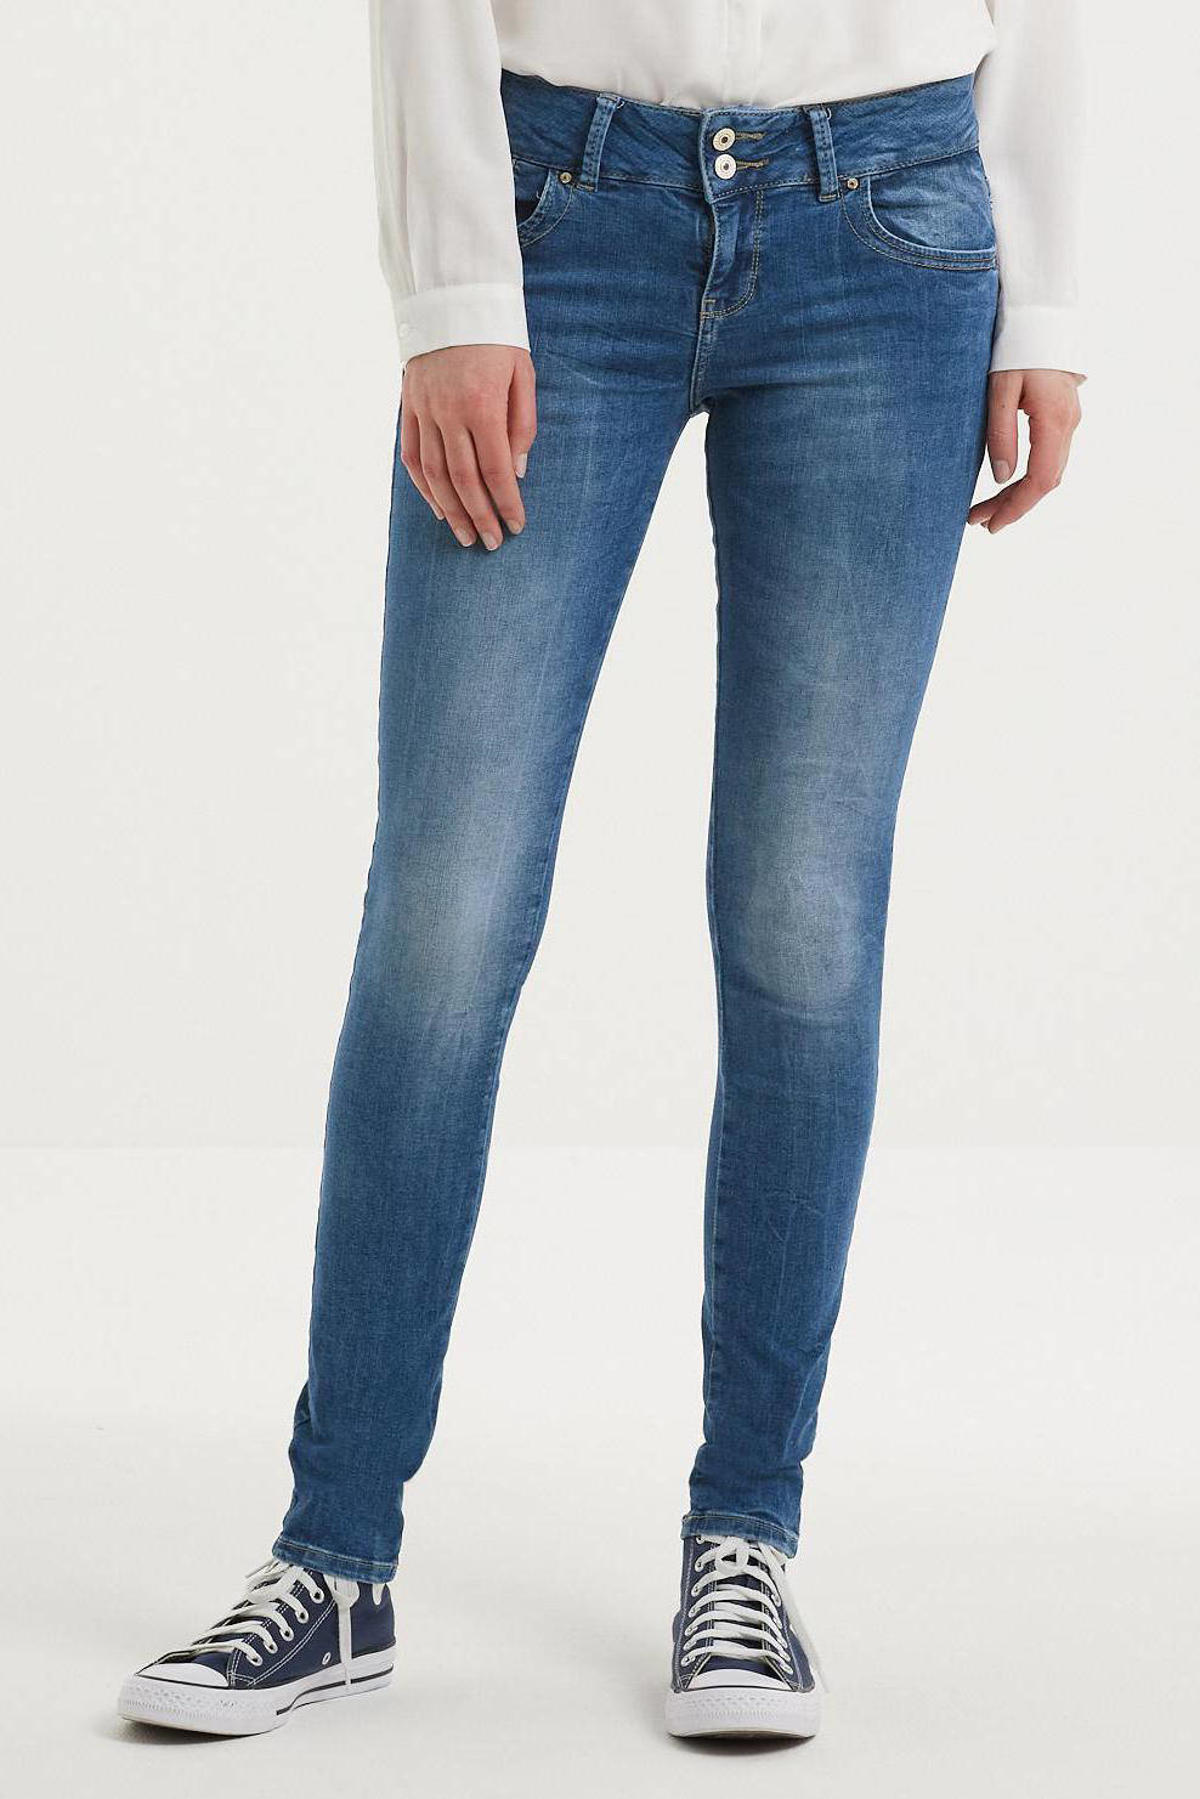 LTB Jeans Molly - 36 inseam jeans for tall women